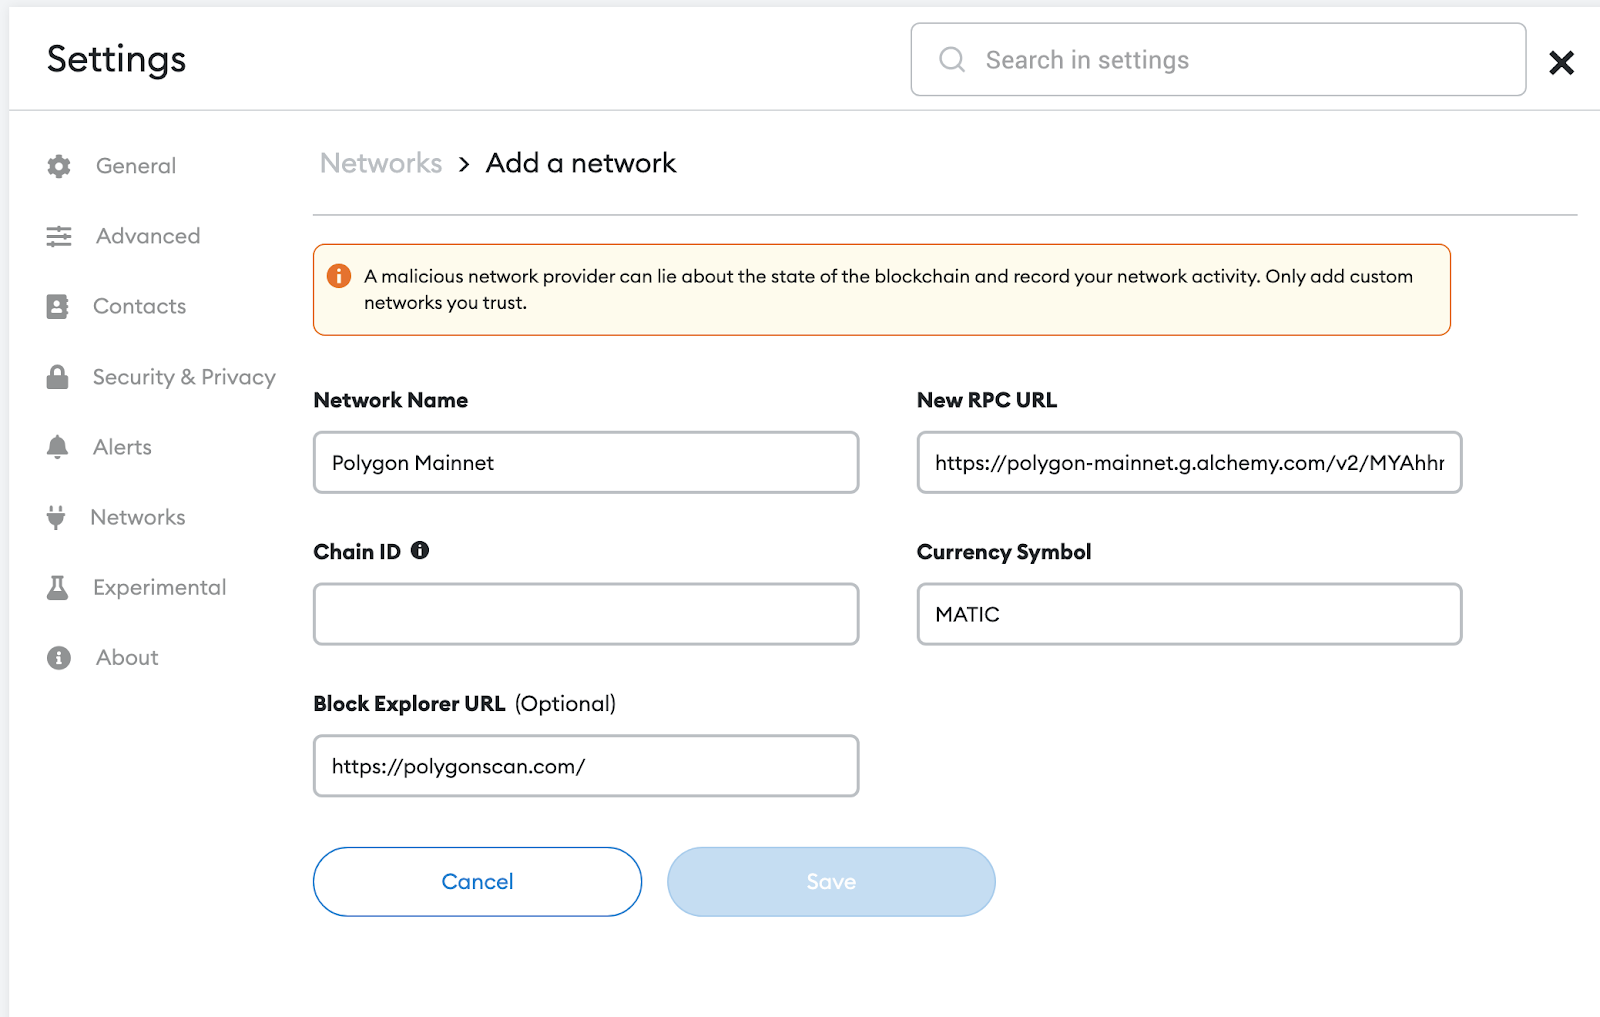 MetaMask network settings interface where you can add your personal RPC endpoint URL.